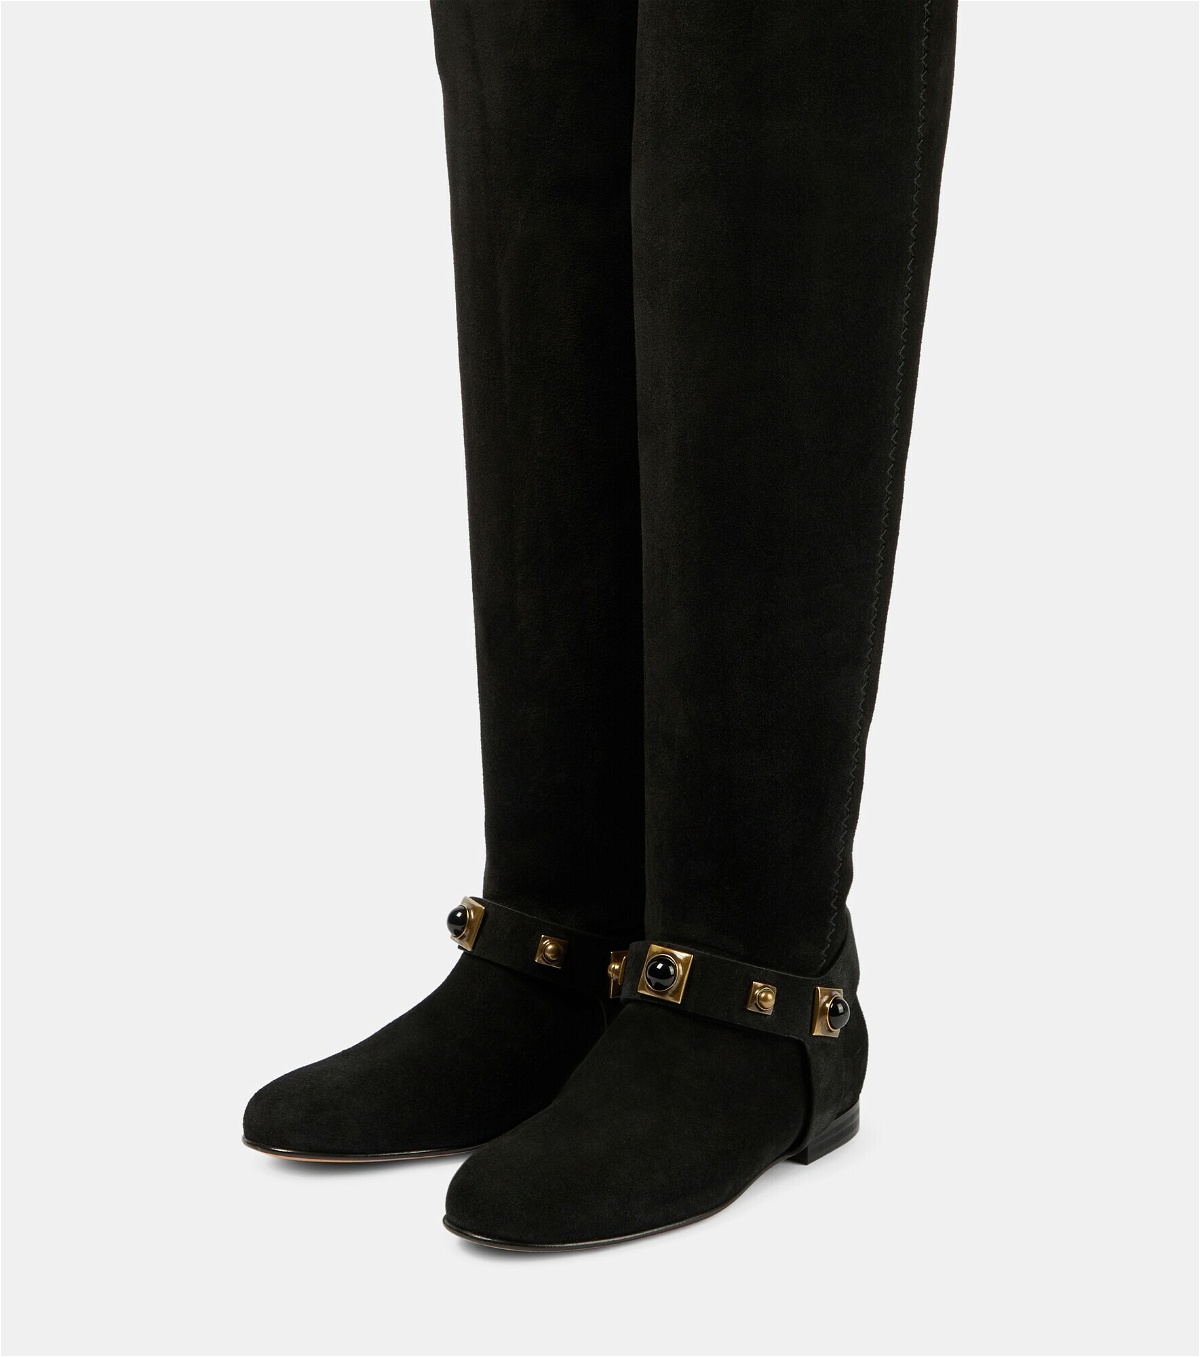 Etro - Crown Me suede knee-high boots Etro